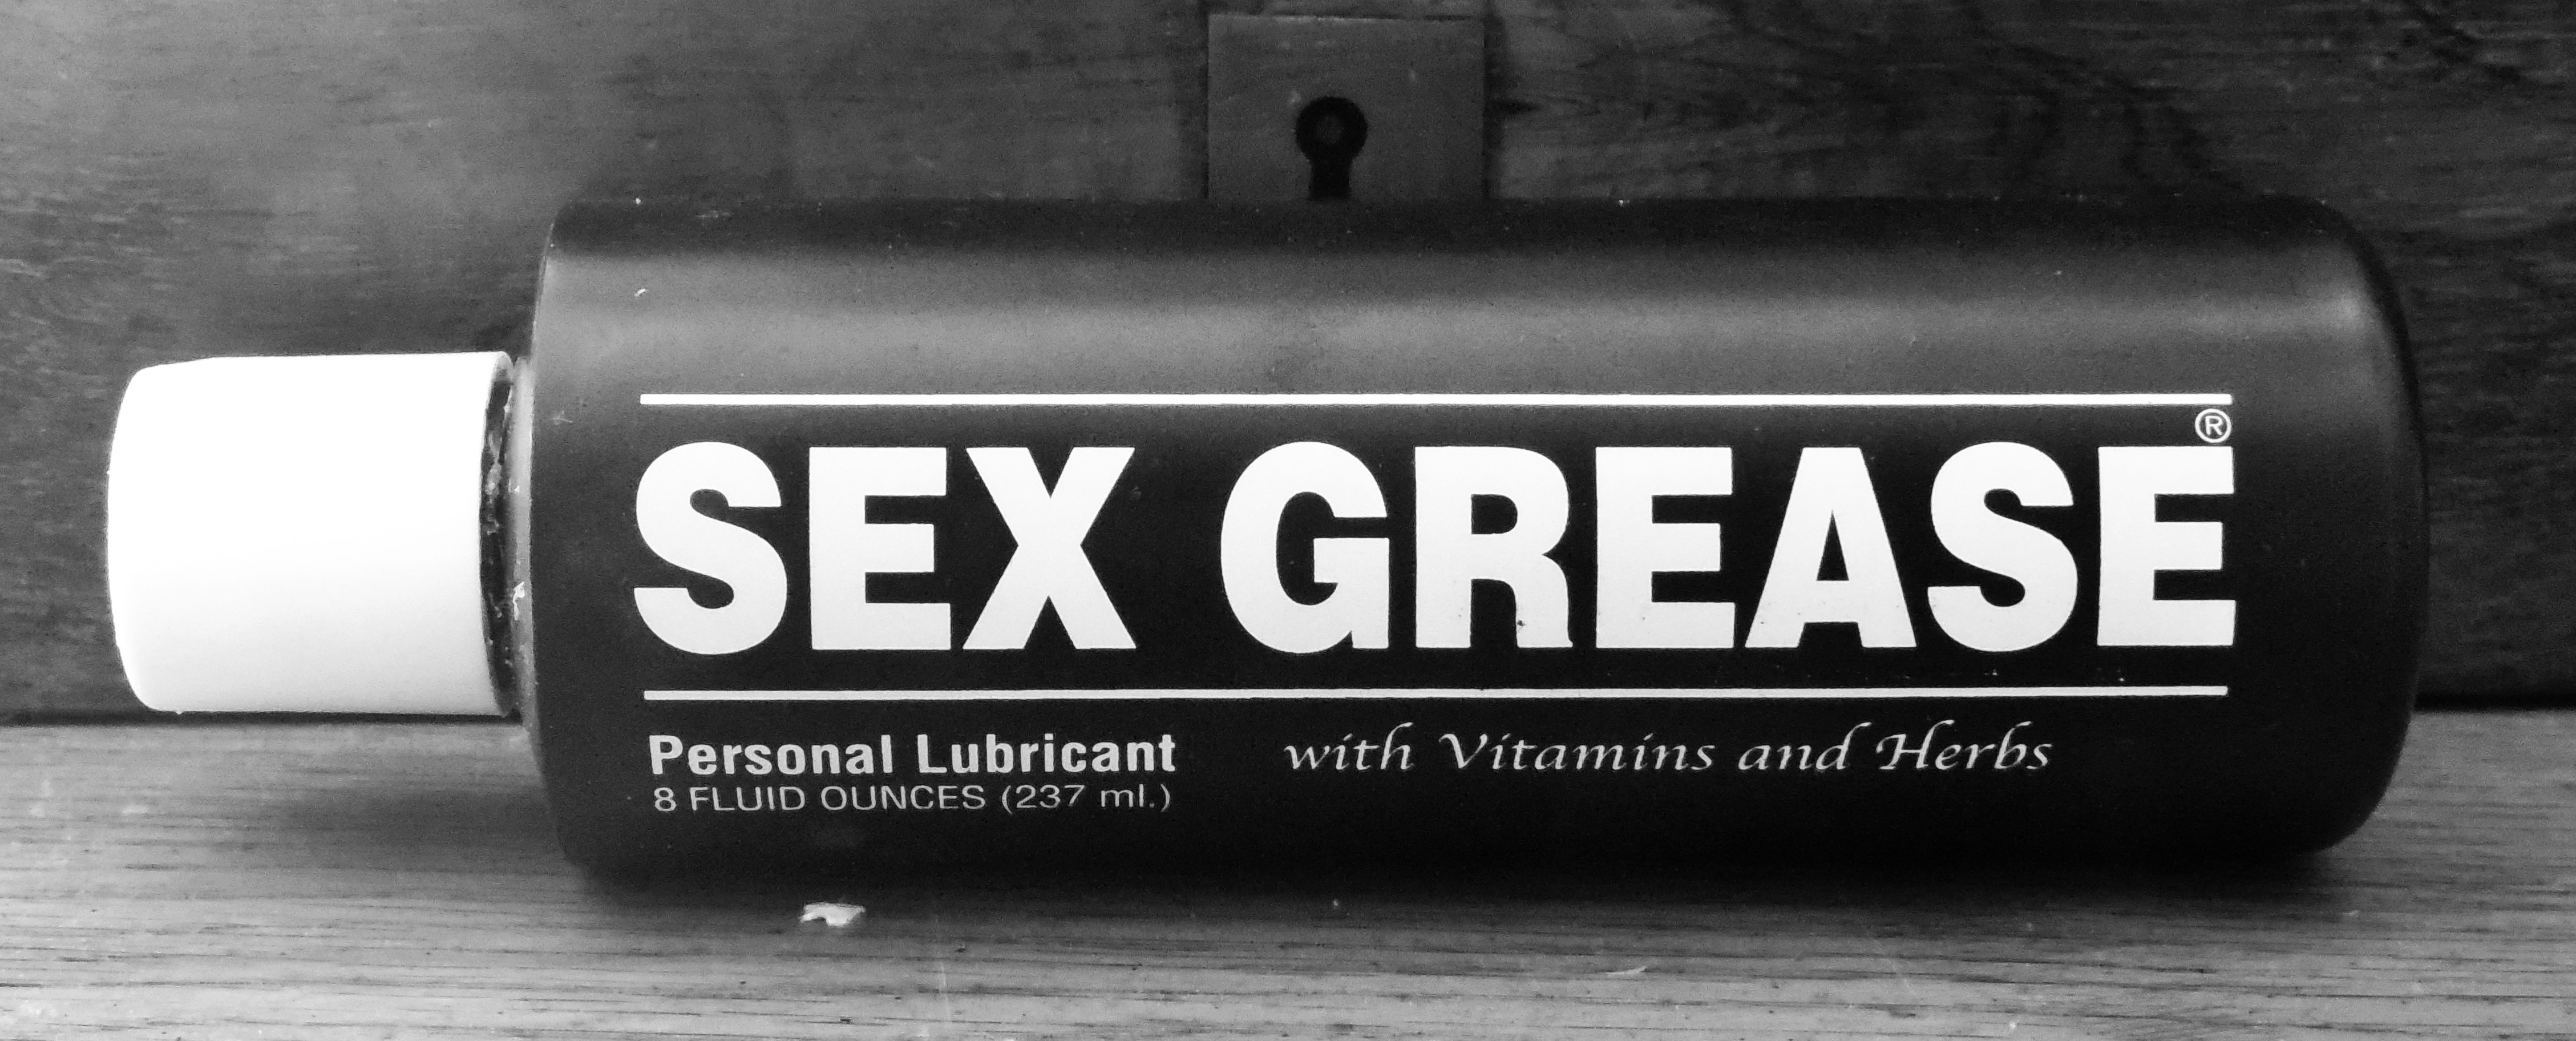 Grease Sex 86